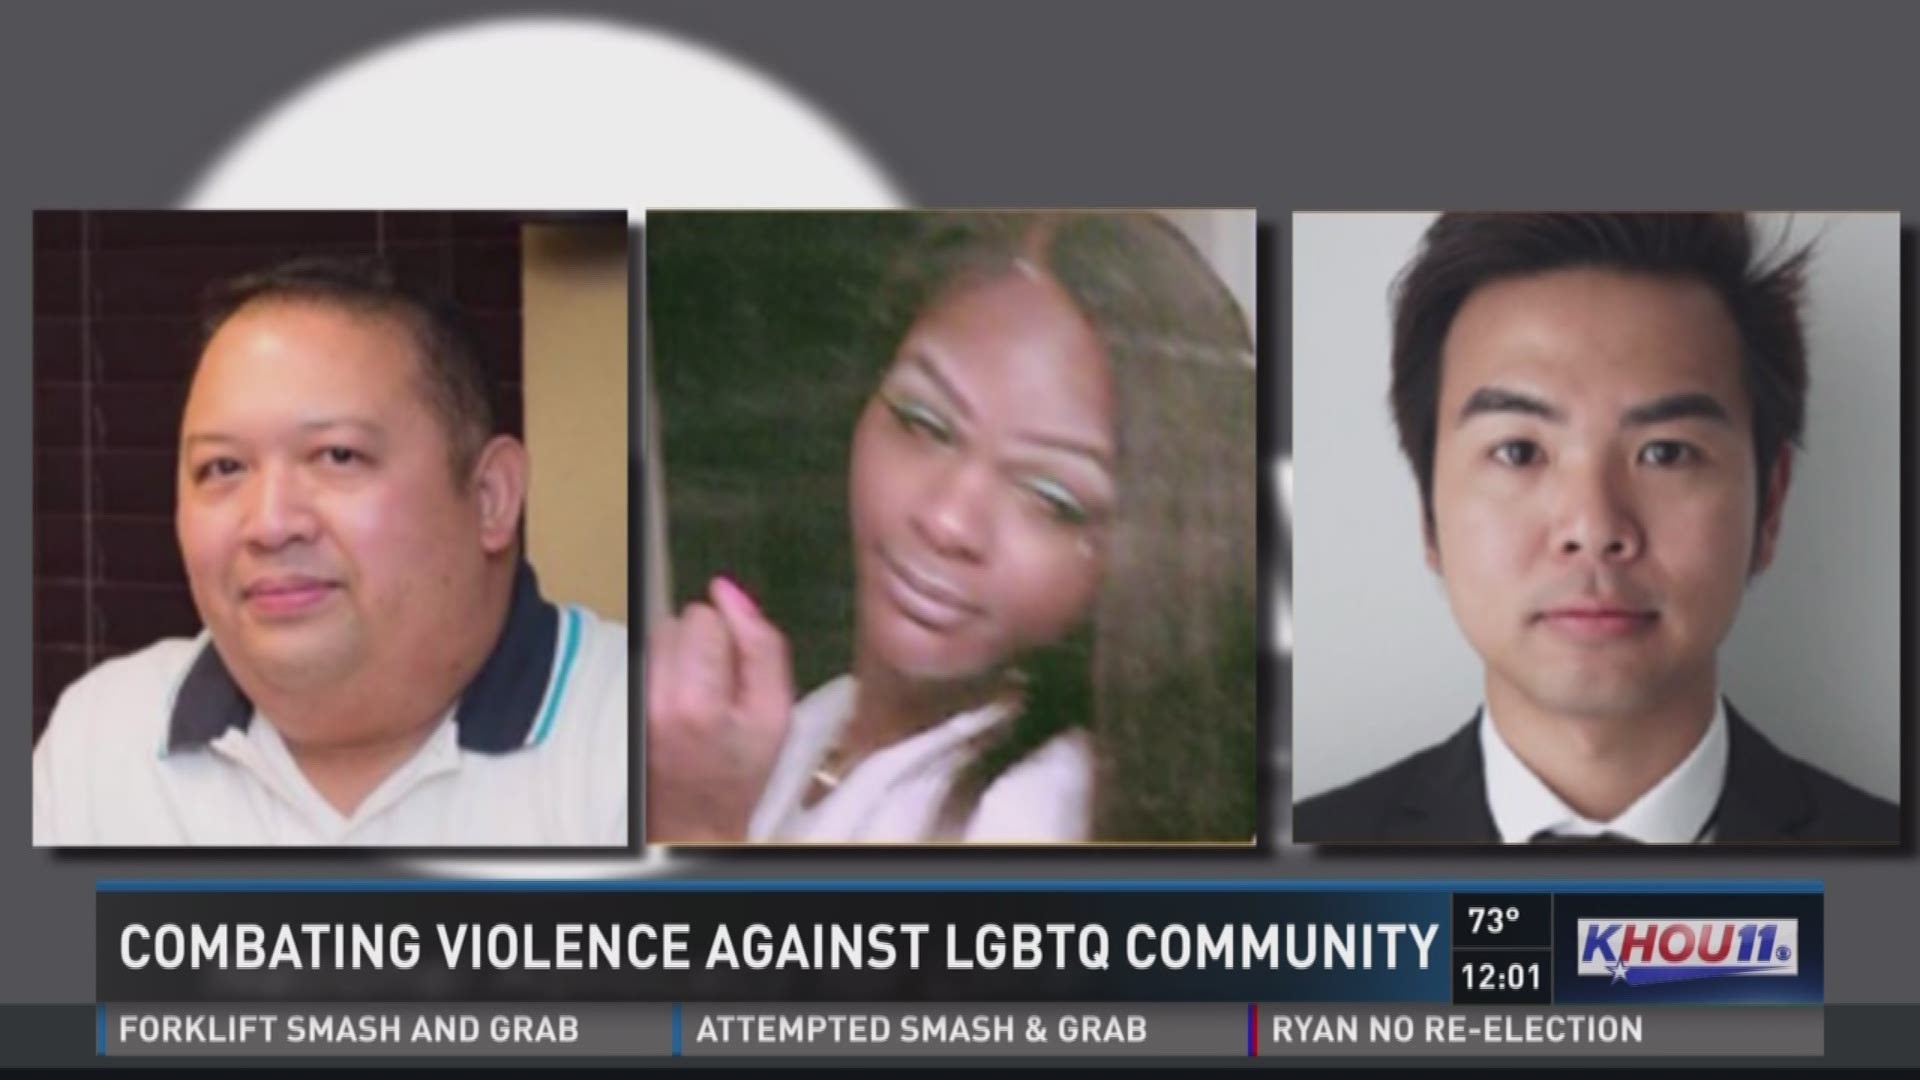 As part of National Crime Victims' Rights Week, the Houston Police Department and other groups are teaming up to help protect the LGBTQ community.  